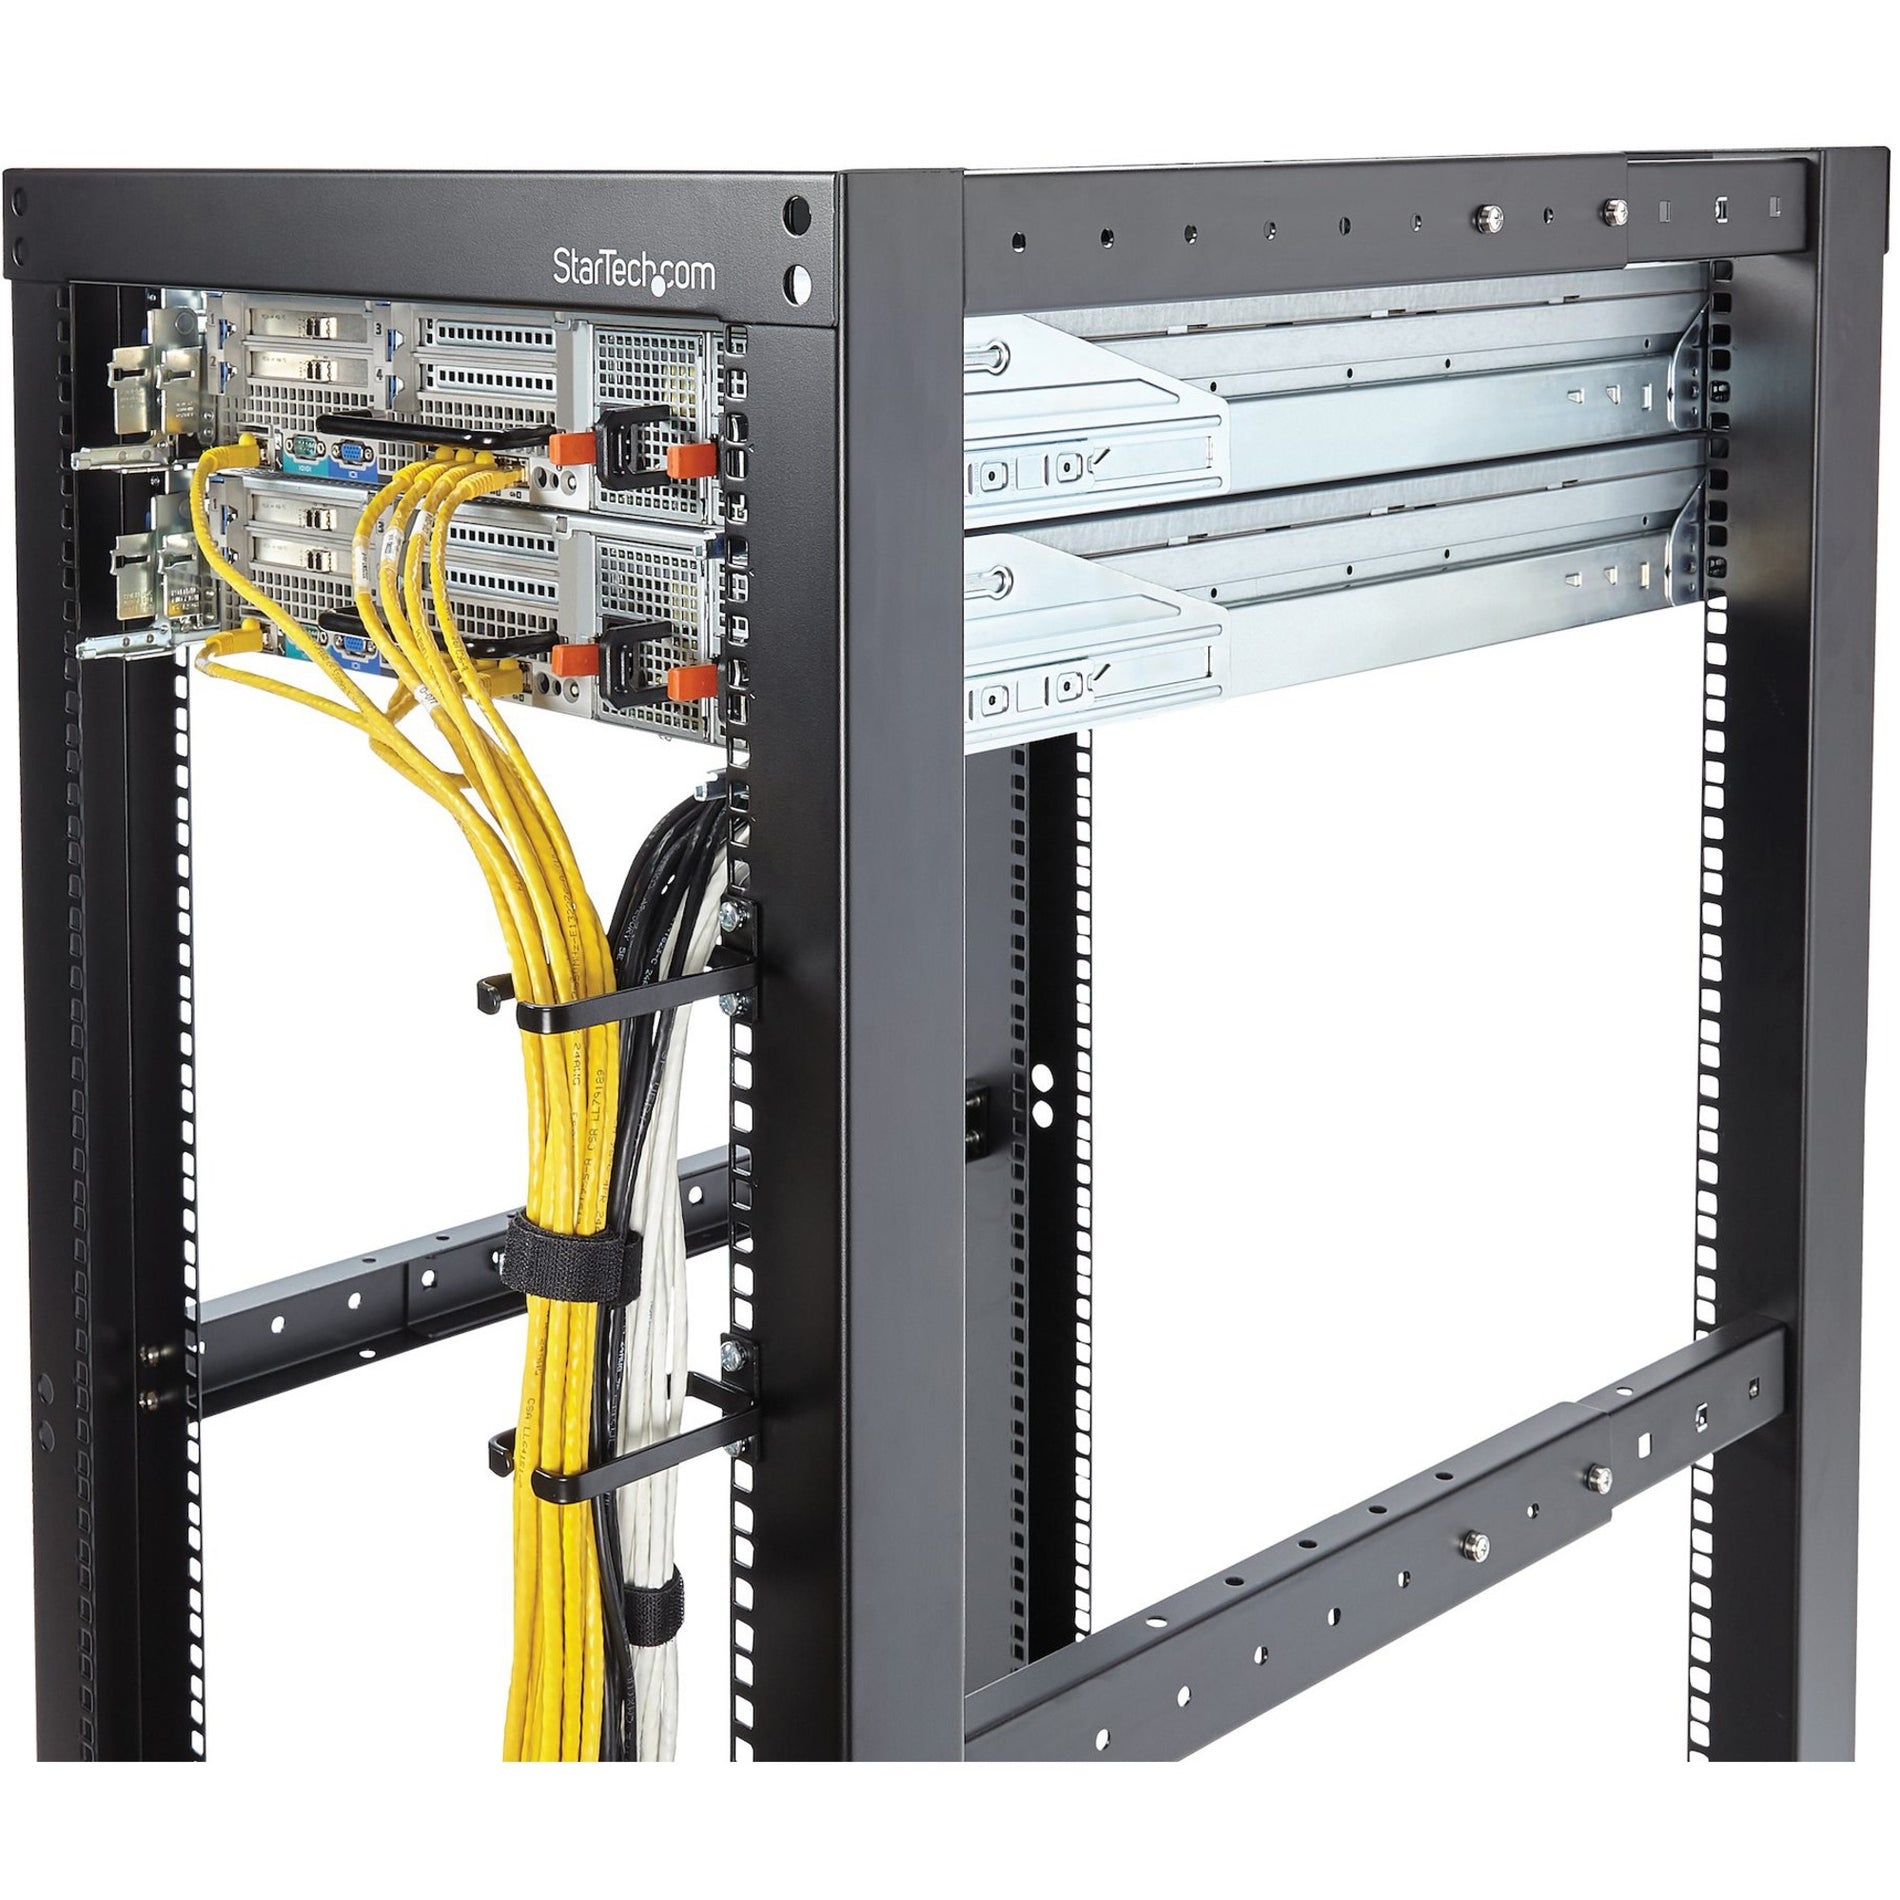 StarTech.com CMHOOK1UN 1U Vertical Server Rack Cable Management D-Ring Hook - Neatly Organize Cables and Wires